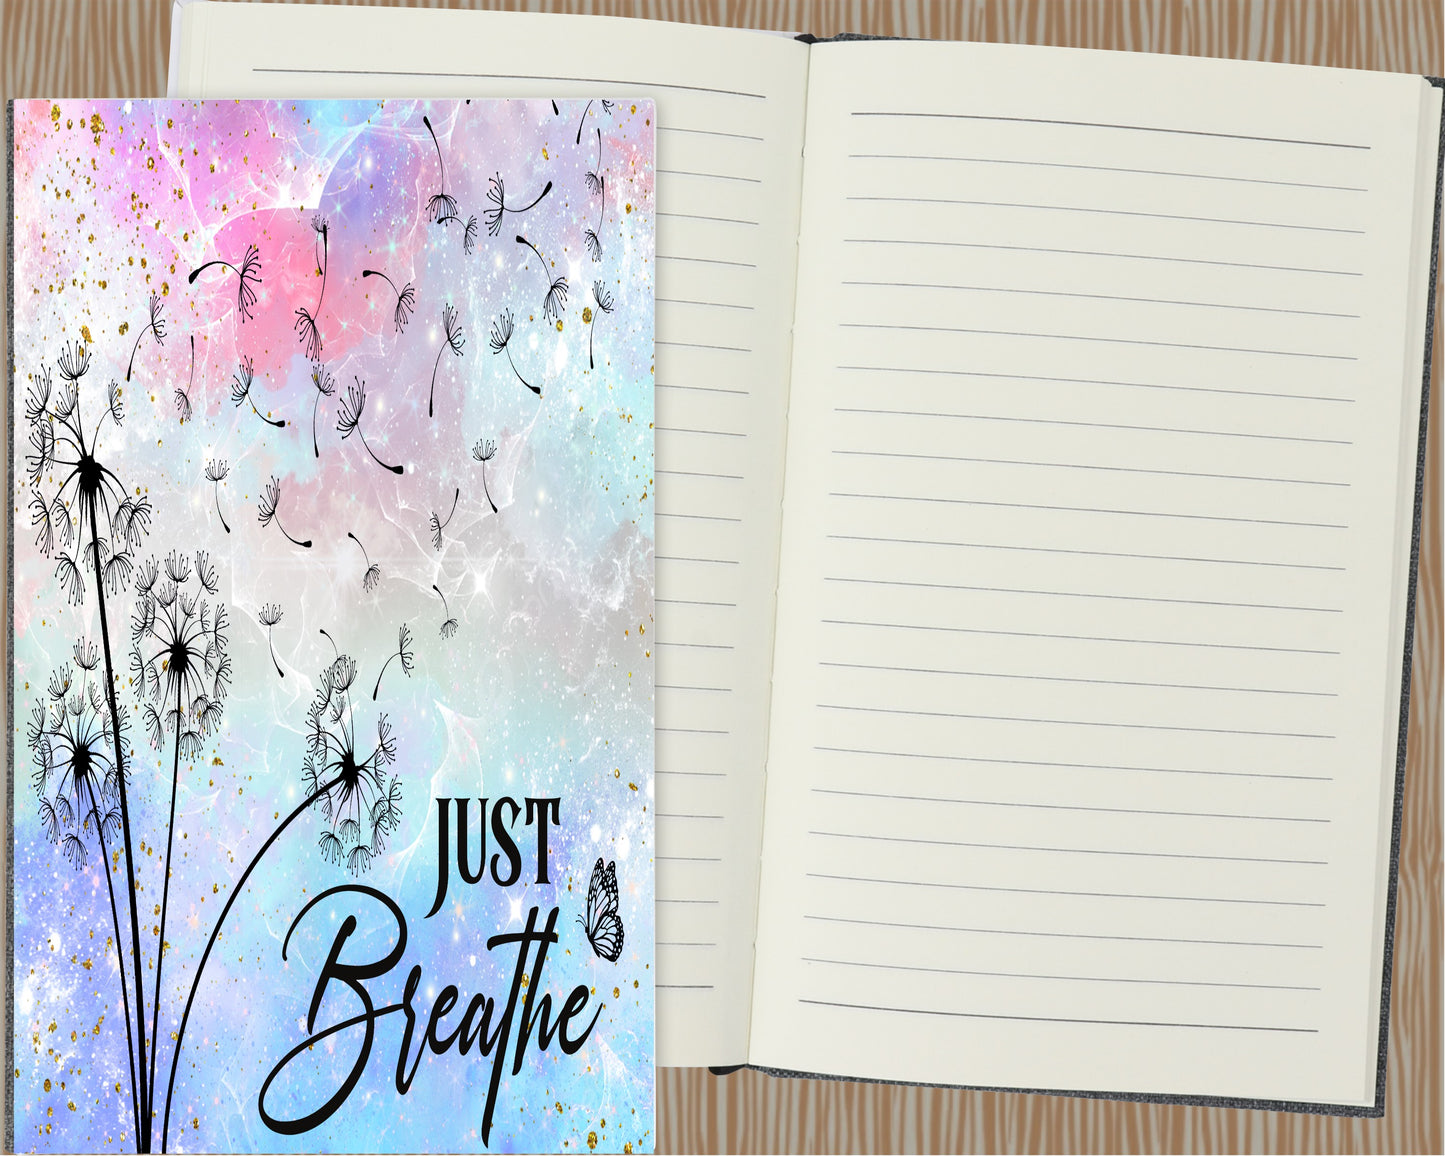 Just Breathe Canvas Journal, Notebook, Motivational Journal, Inspirational Journal, Handmade Journal, Gift For Her, Diary